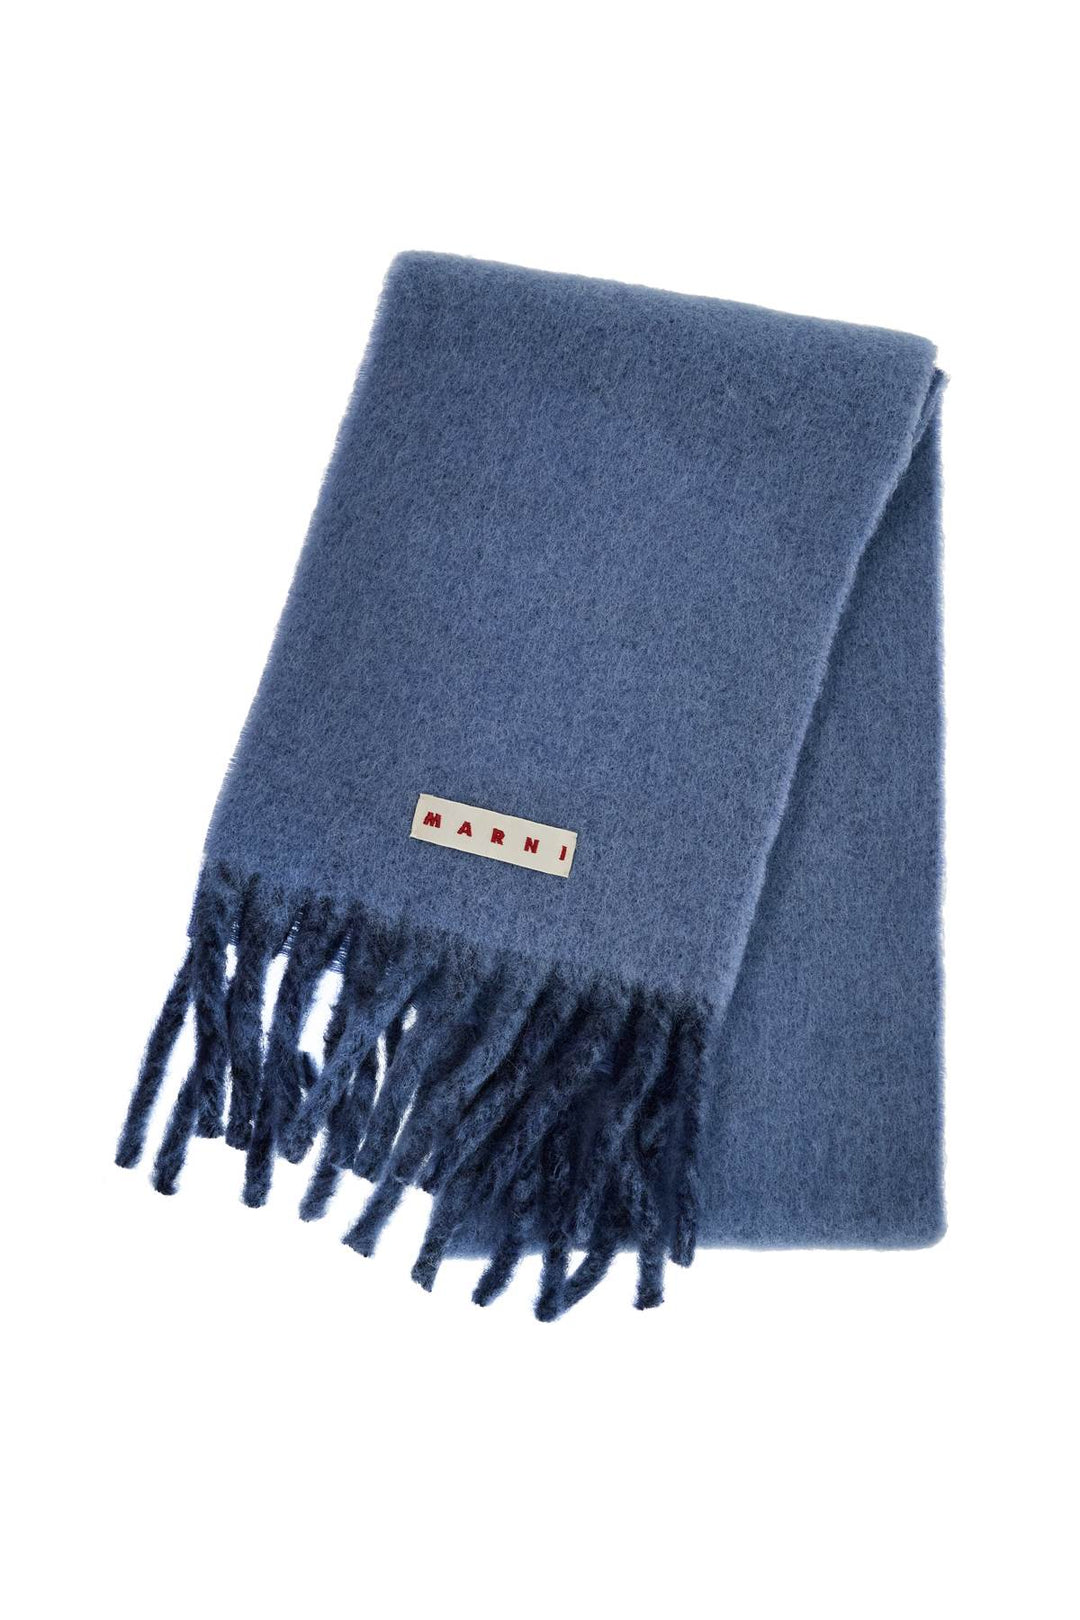 Marni Wool And Mohair Scarf With Maxi Logo   Blue